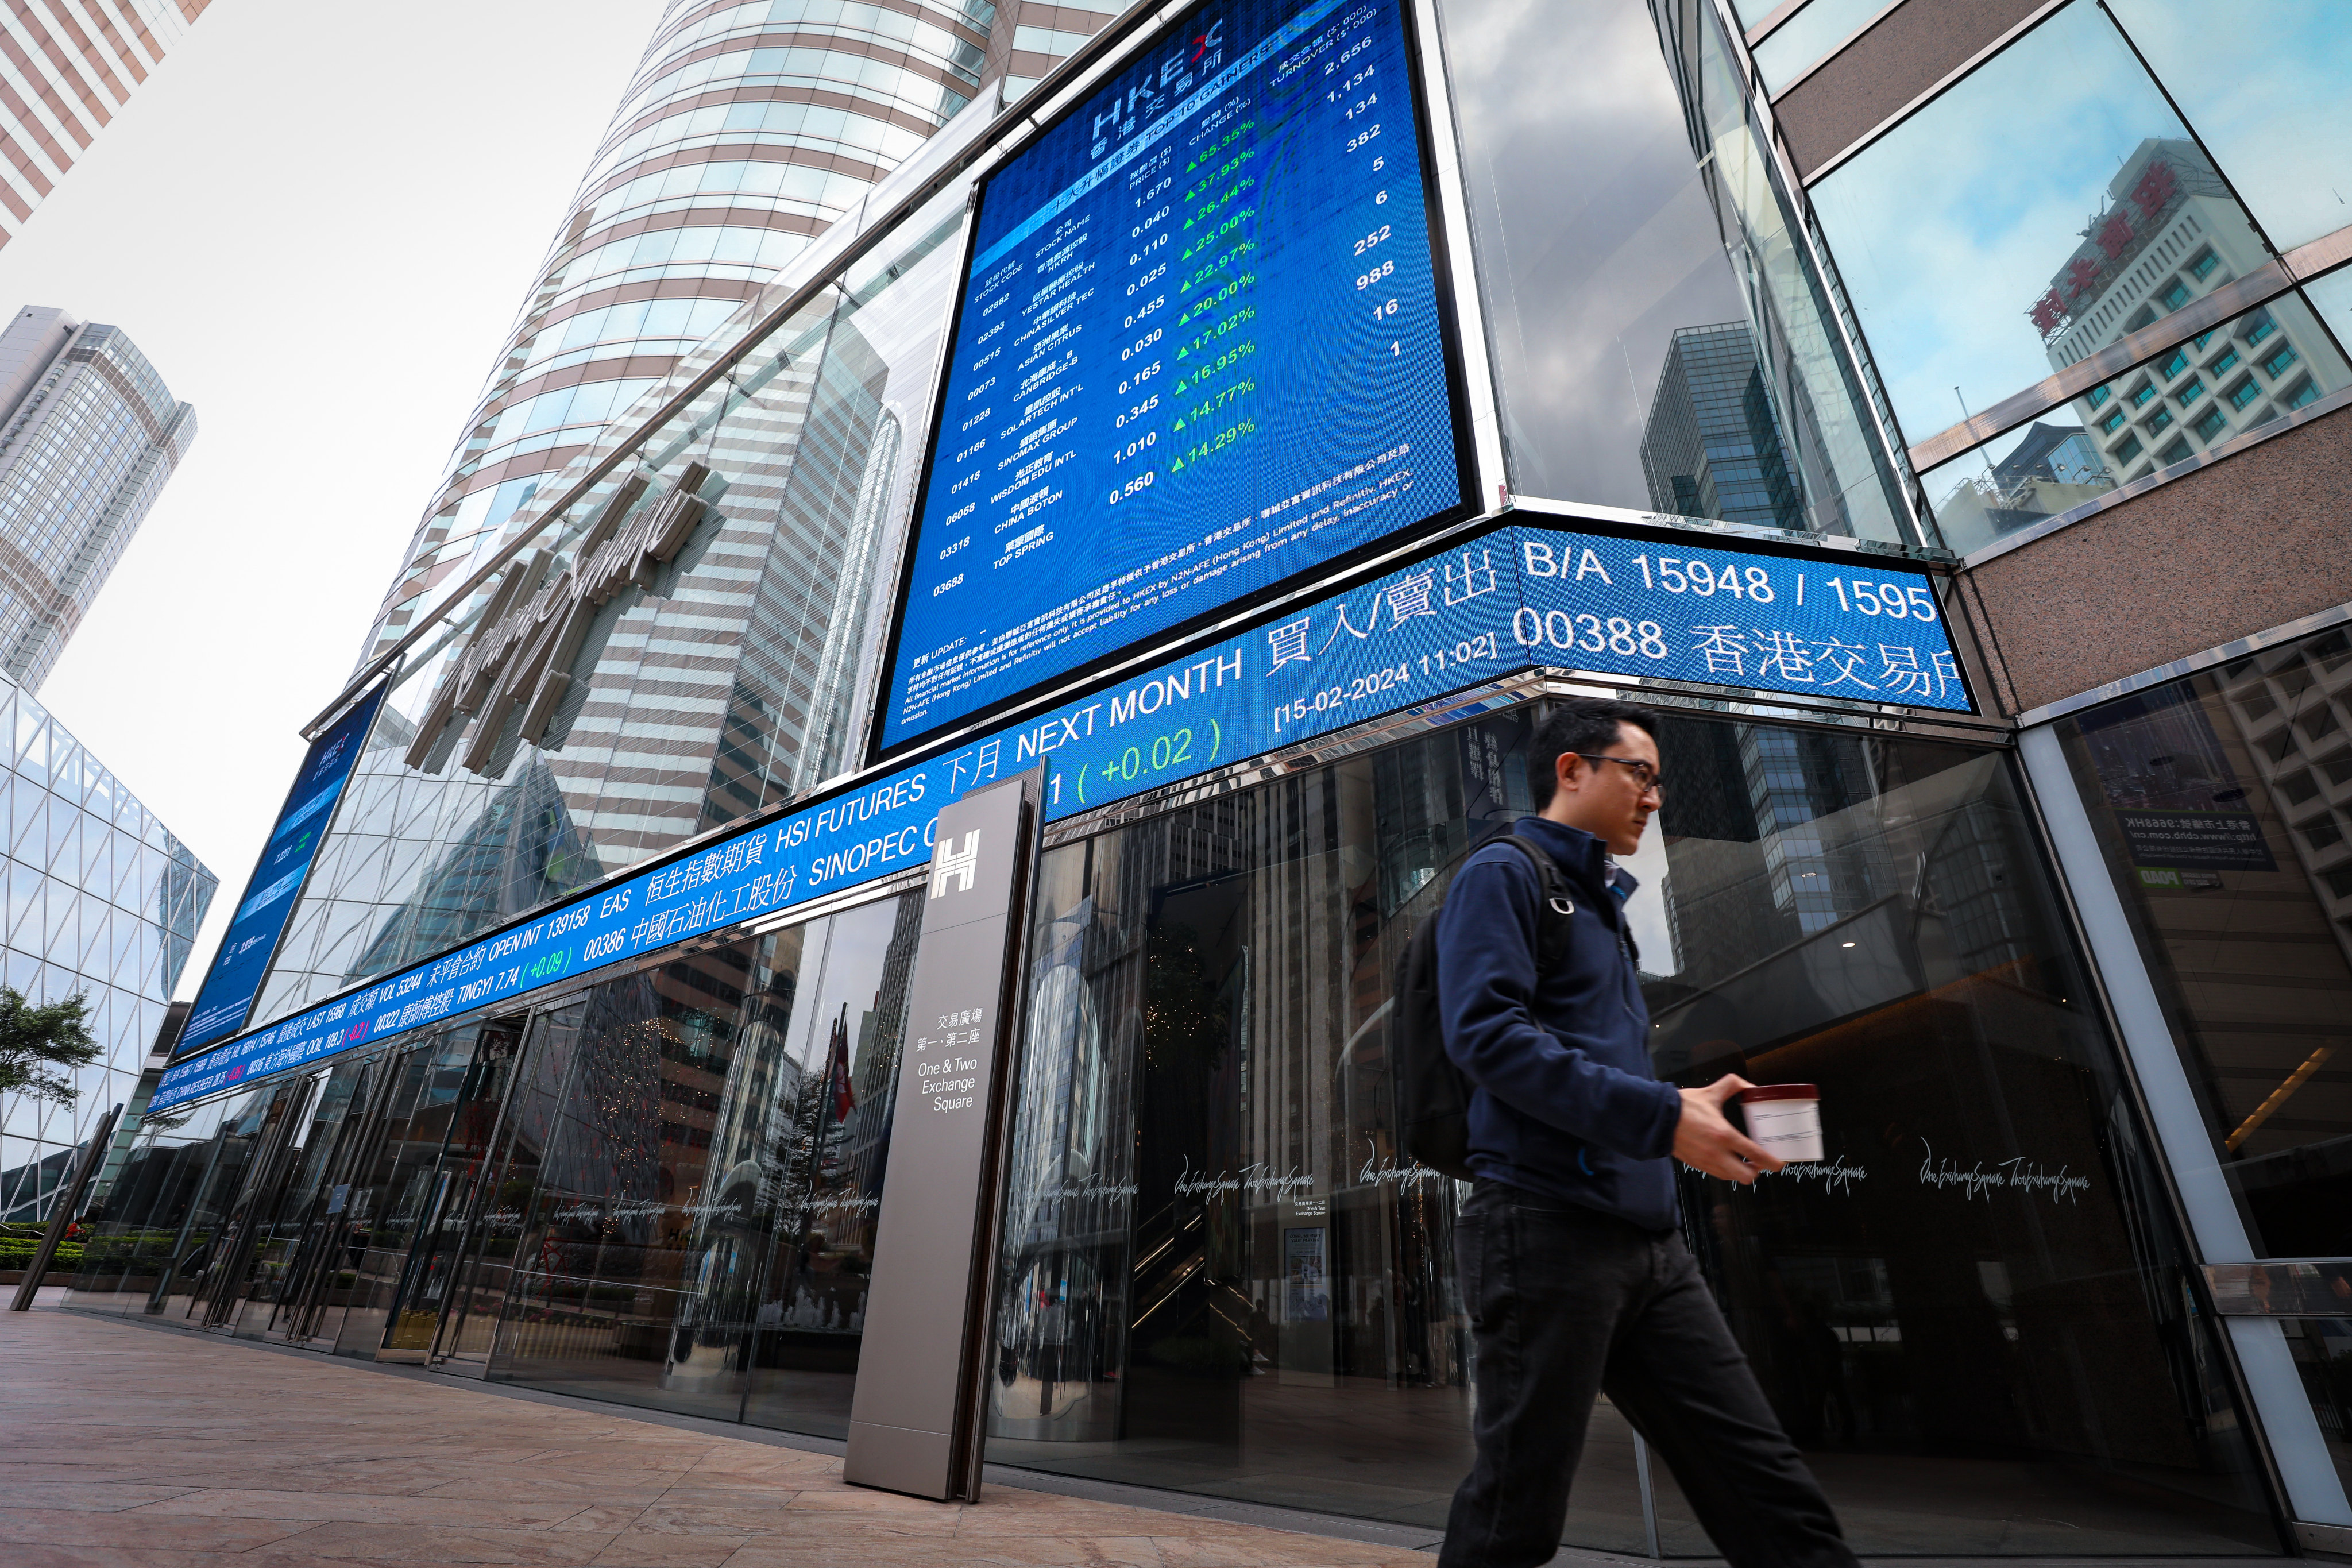 Screens show stock information outside Exchange Square in Hong Kong, home of the city’s bourse operator, on February 15, 2024. Photo: Sun Yeung